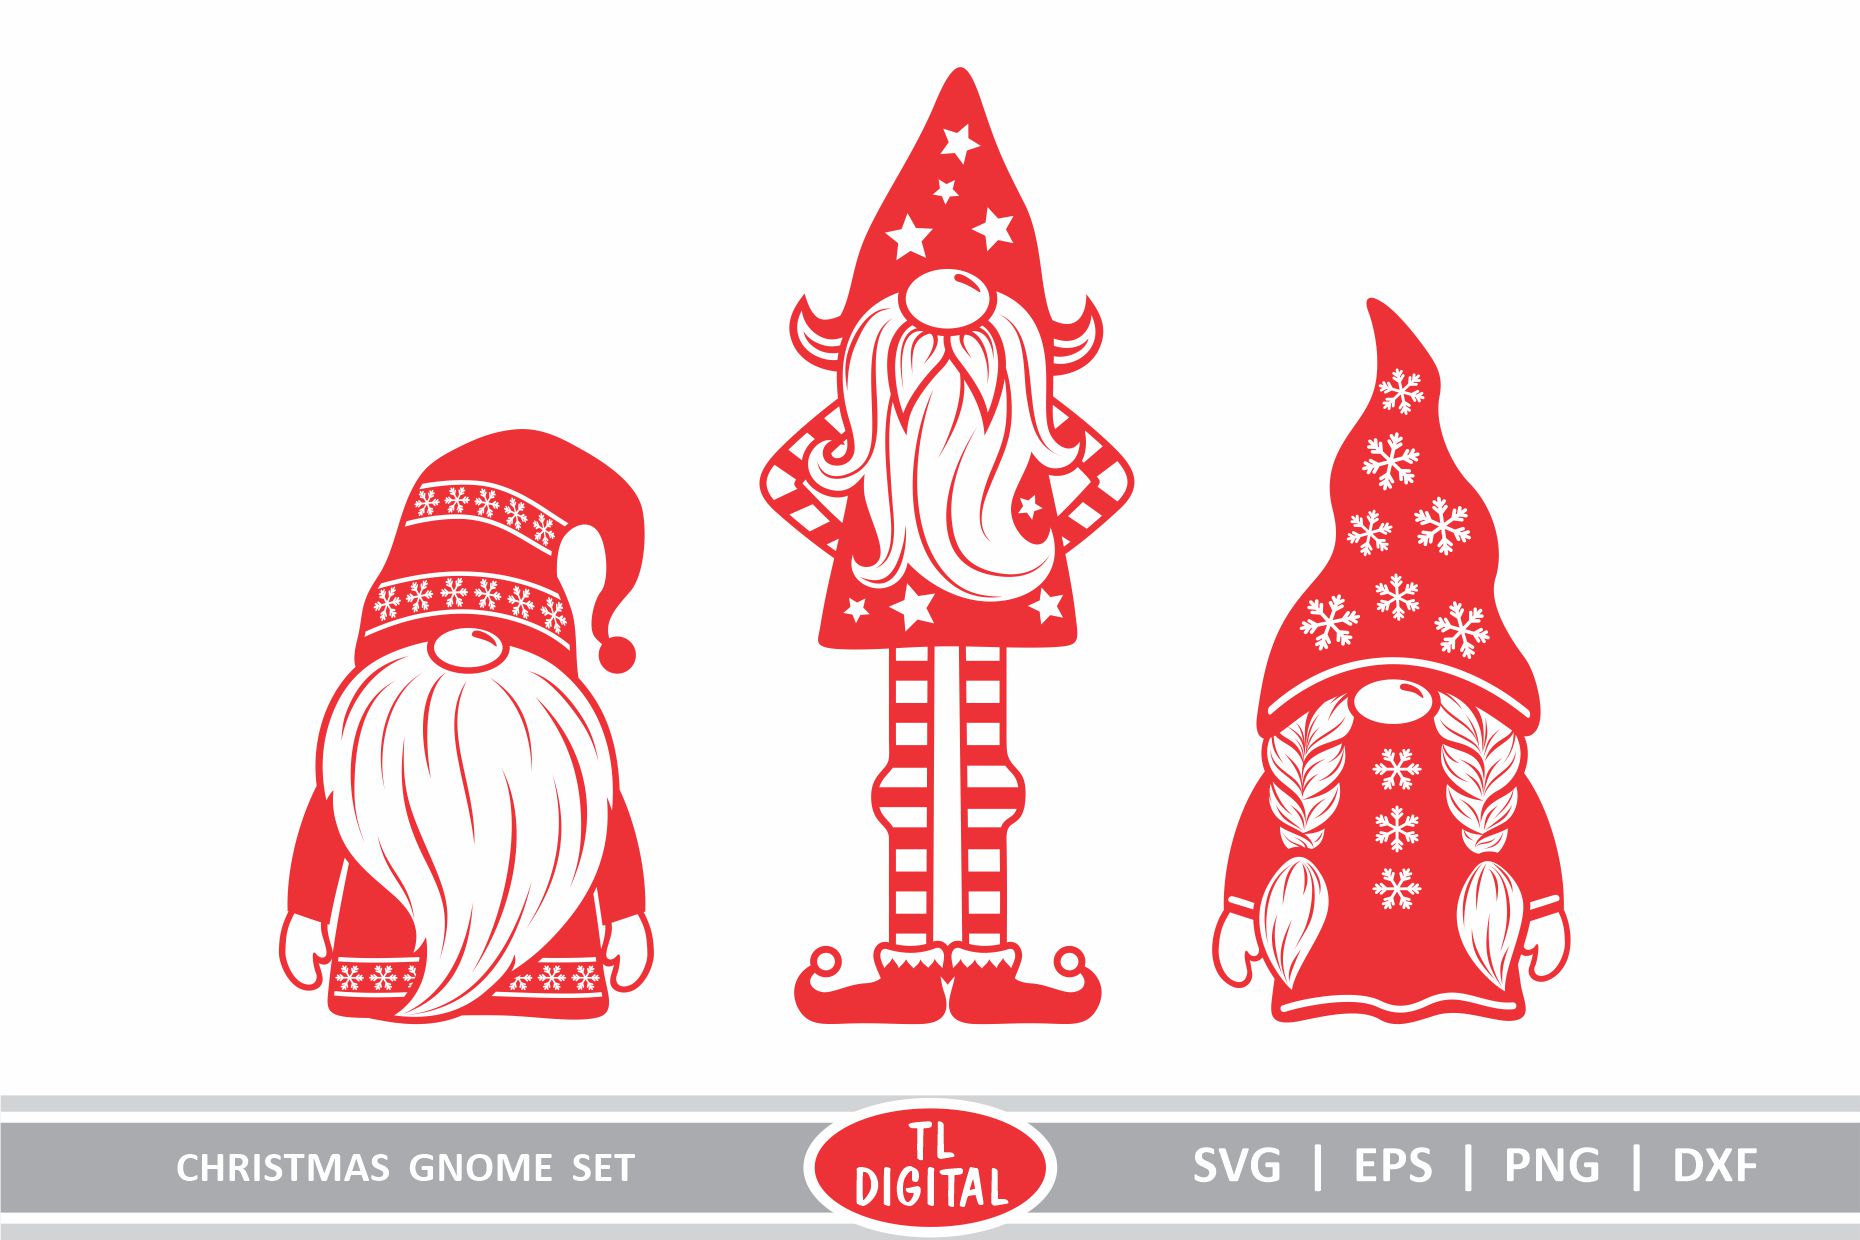 Download Christmas Gnomes Set of 3 Cutting Files - Gnome Designs